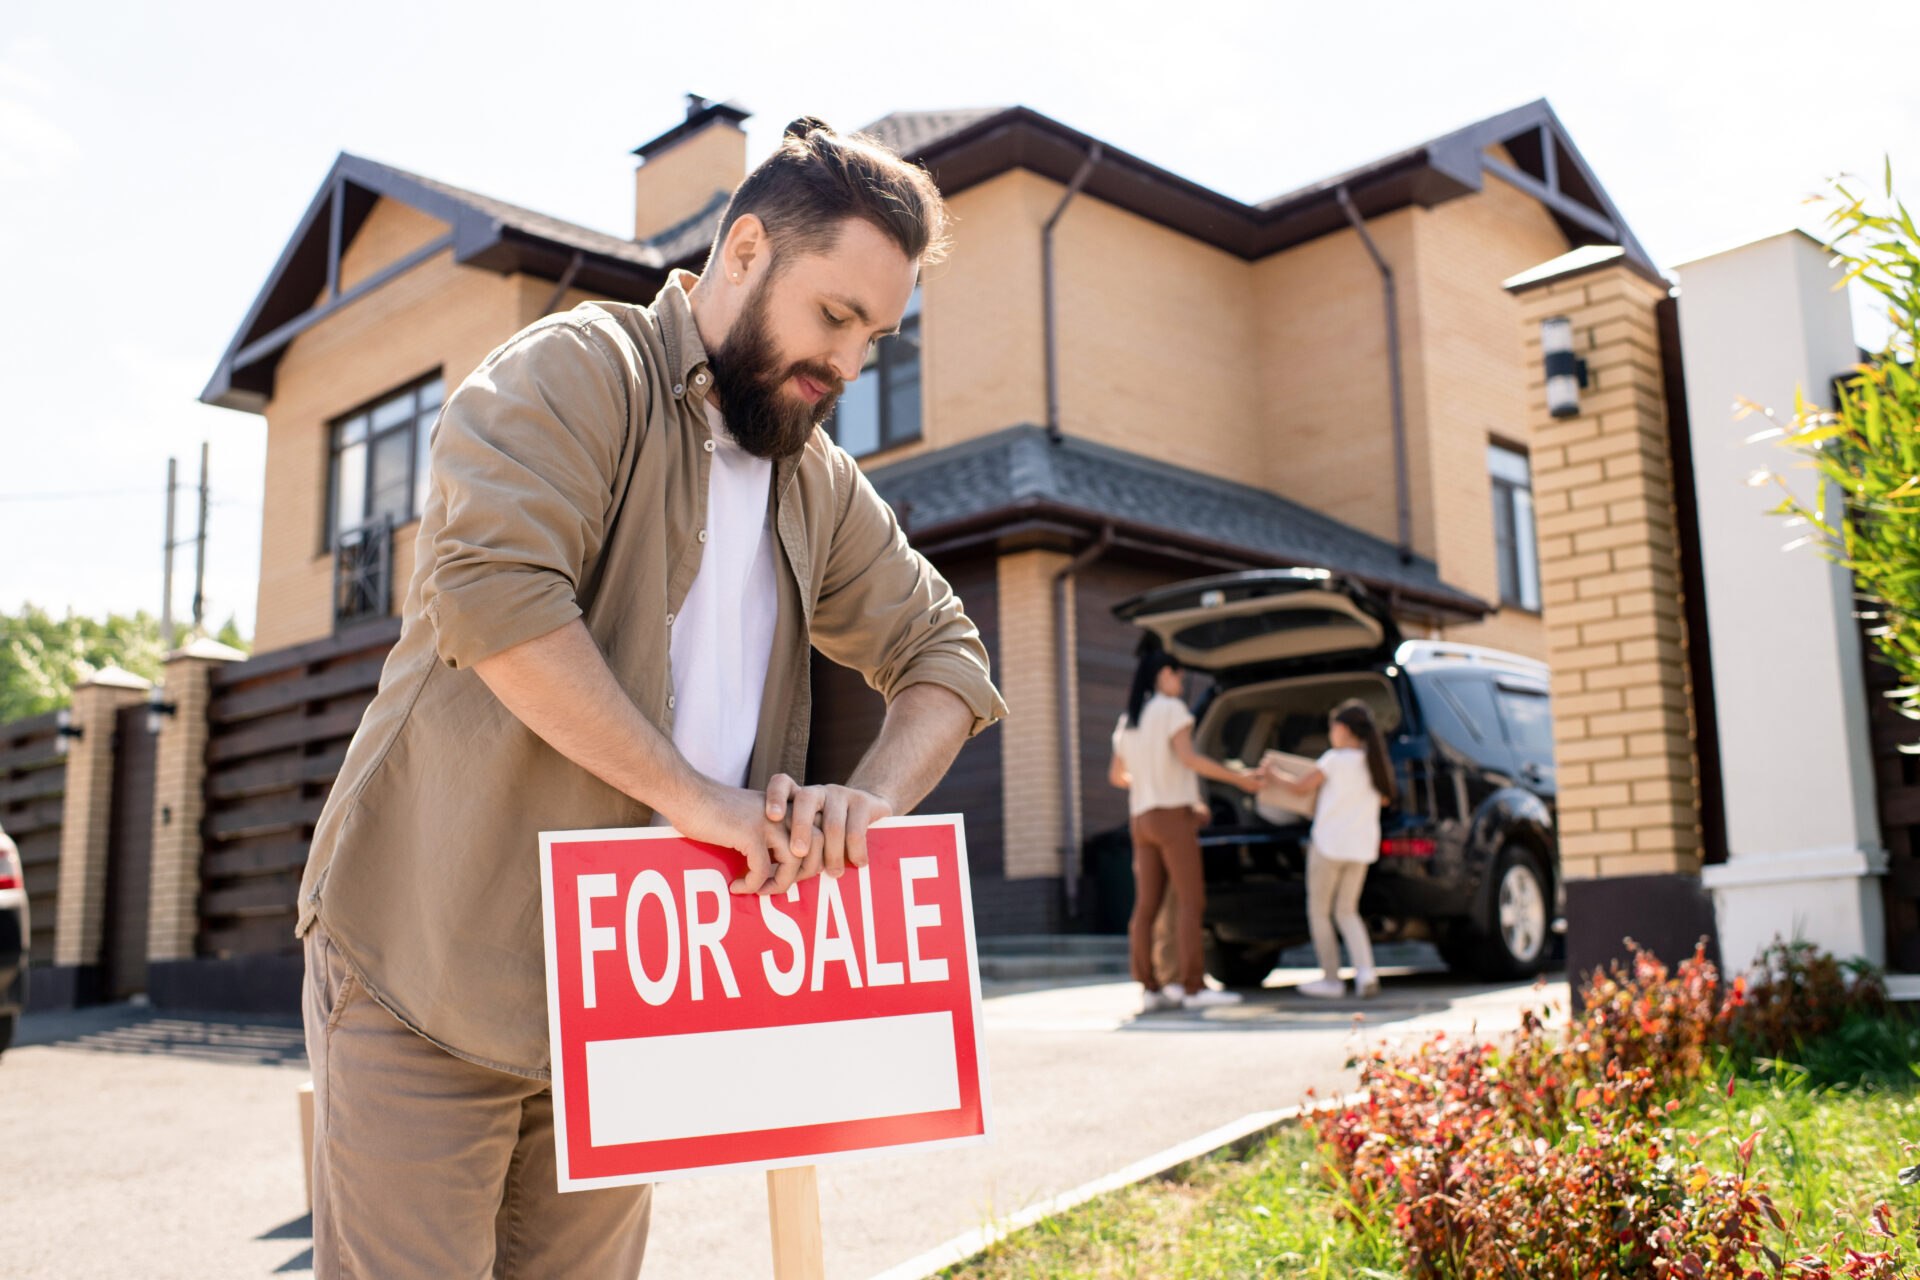 RE/MAX: Home Sales, Median Sale Price Dropped in August